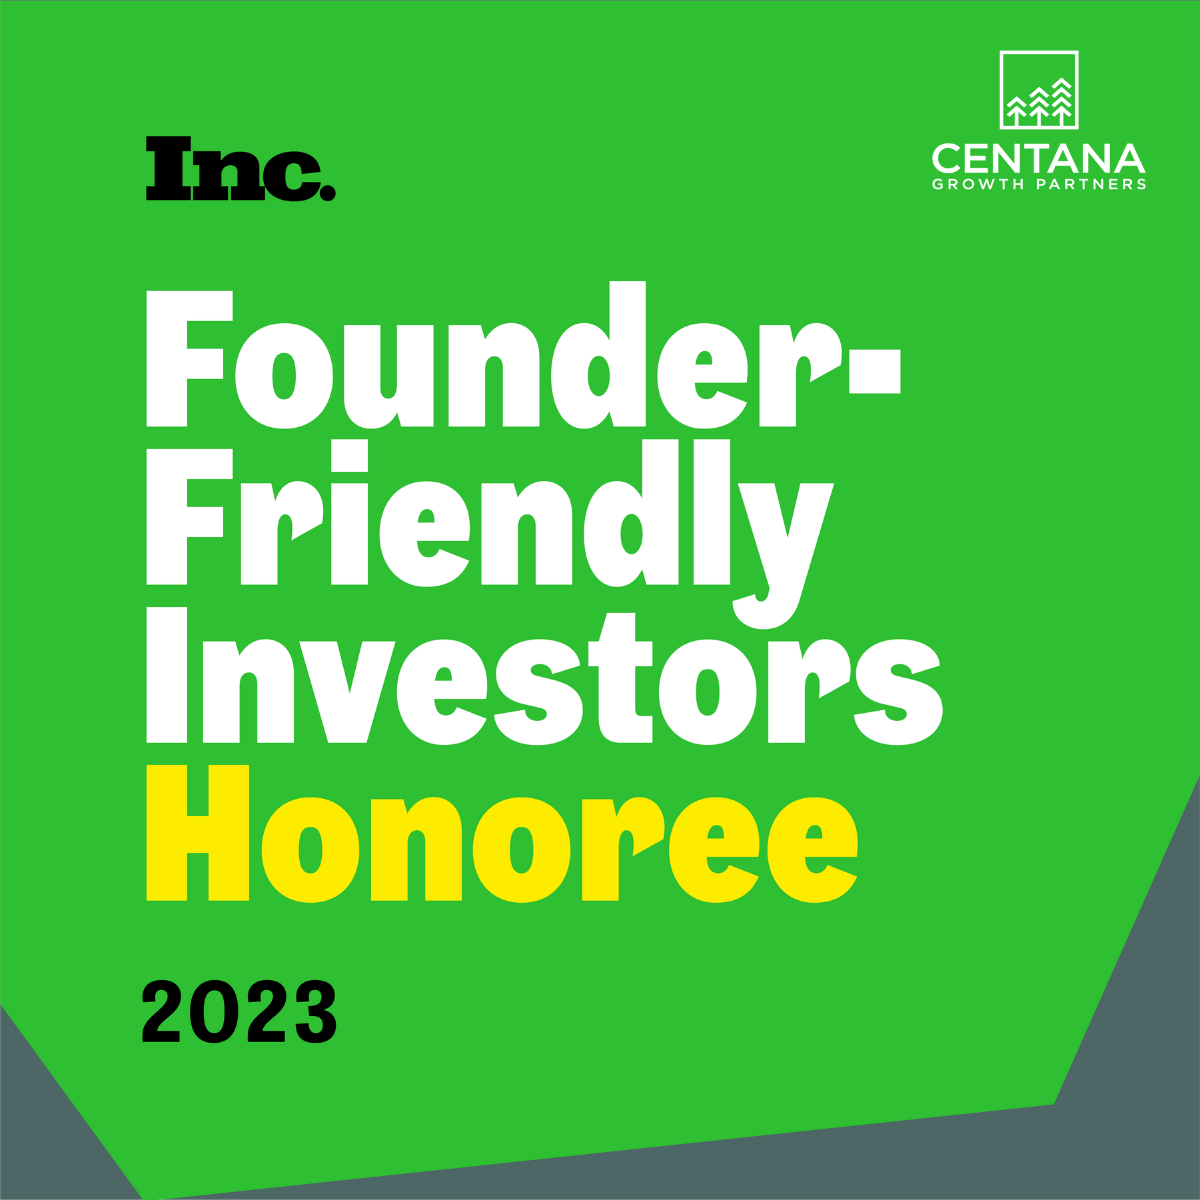 Centana Growth Partners Named to Inc.’s 2023 List of Founder-Friendly Investors